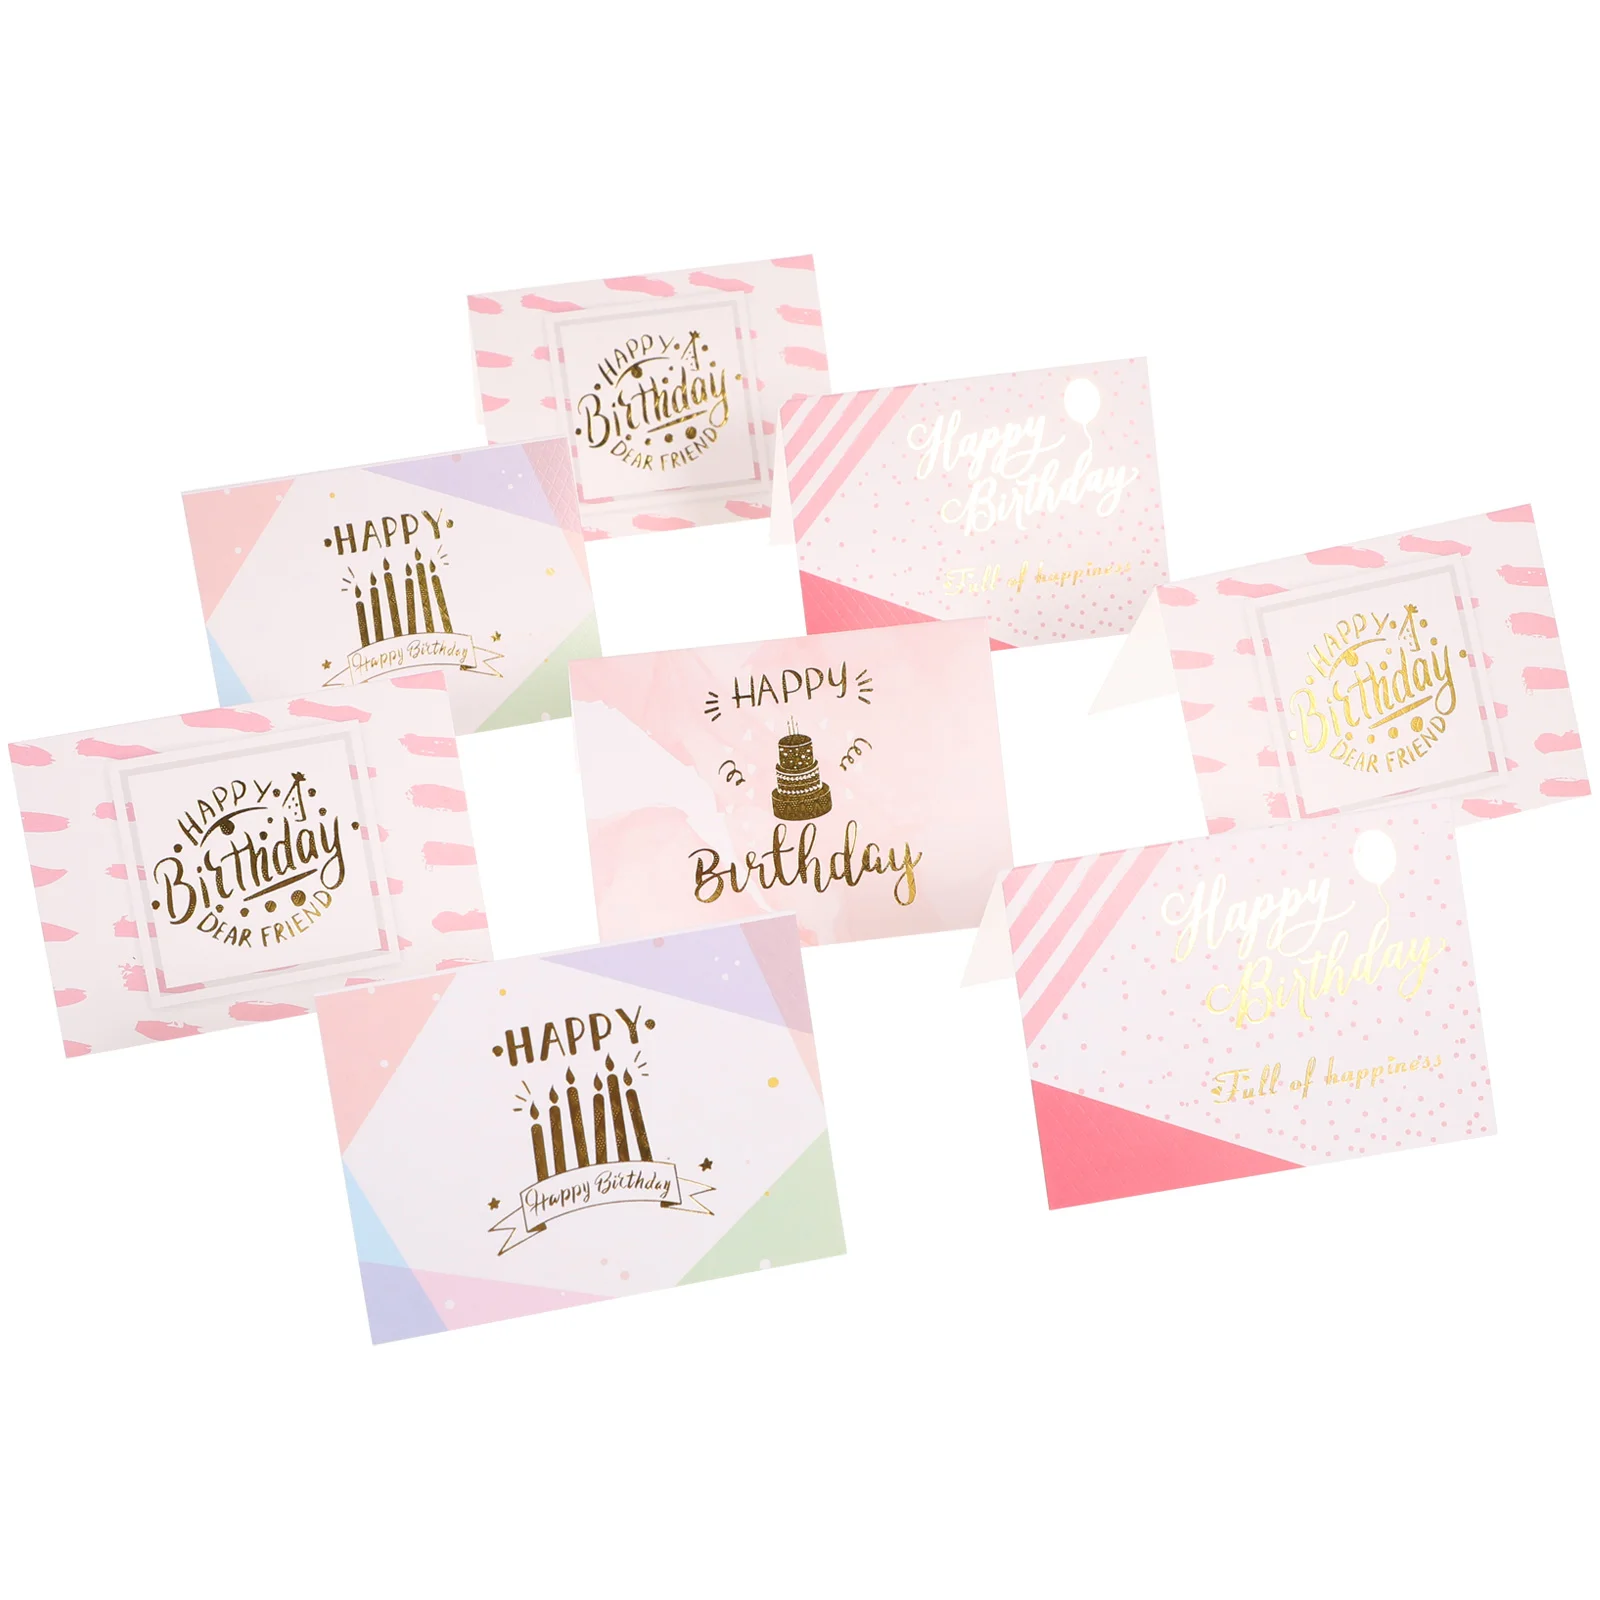 

40 Pcs Birthday Card Writing Cards Fold Party Blessing Happy Assorted Paper Decorative Greeting Assortment Women